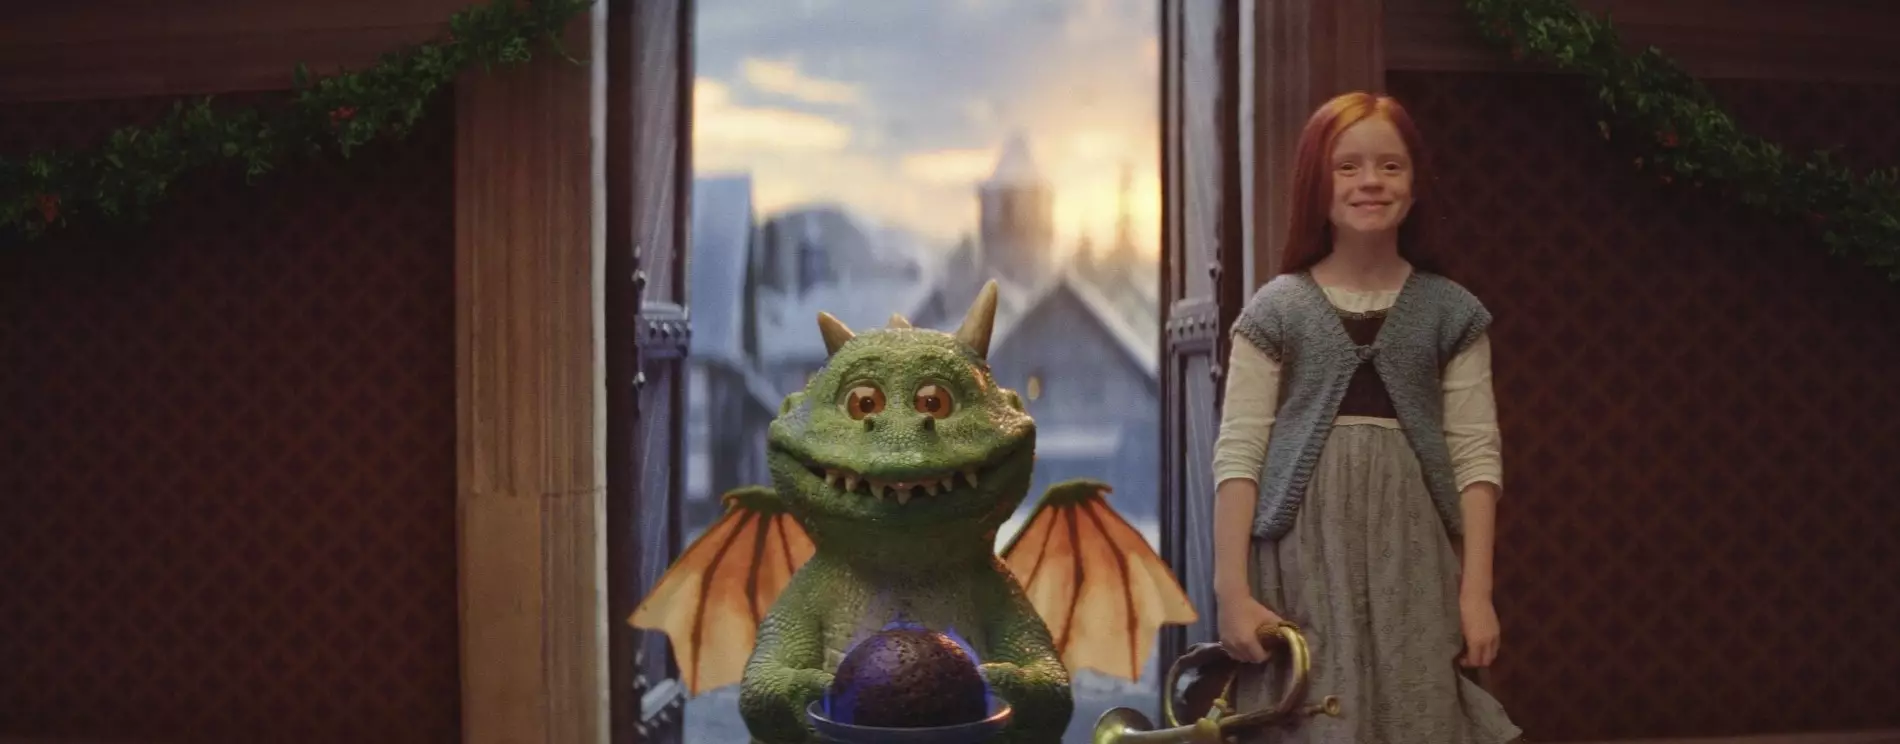 Ruby with her on-screen pal Edgar the dragon.